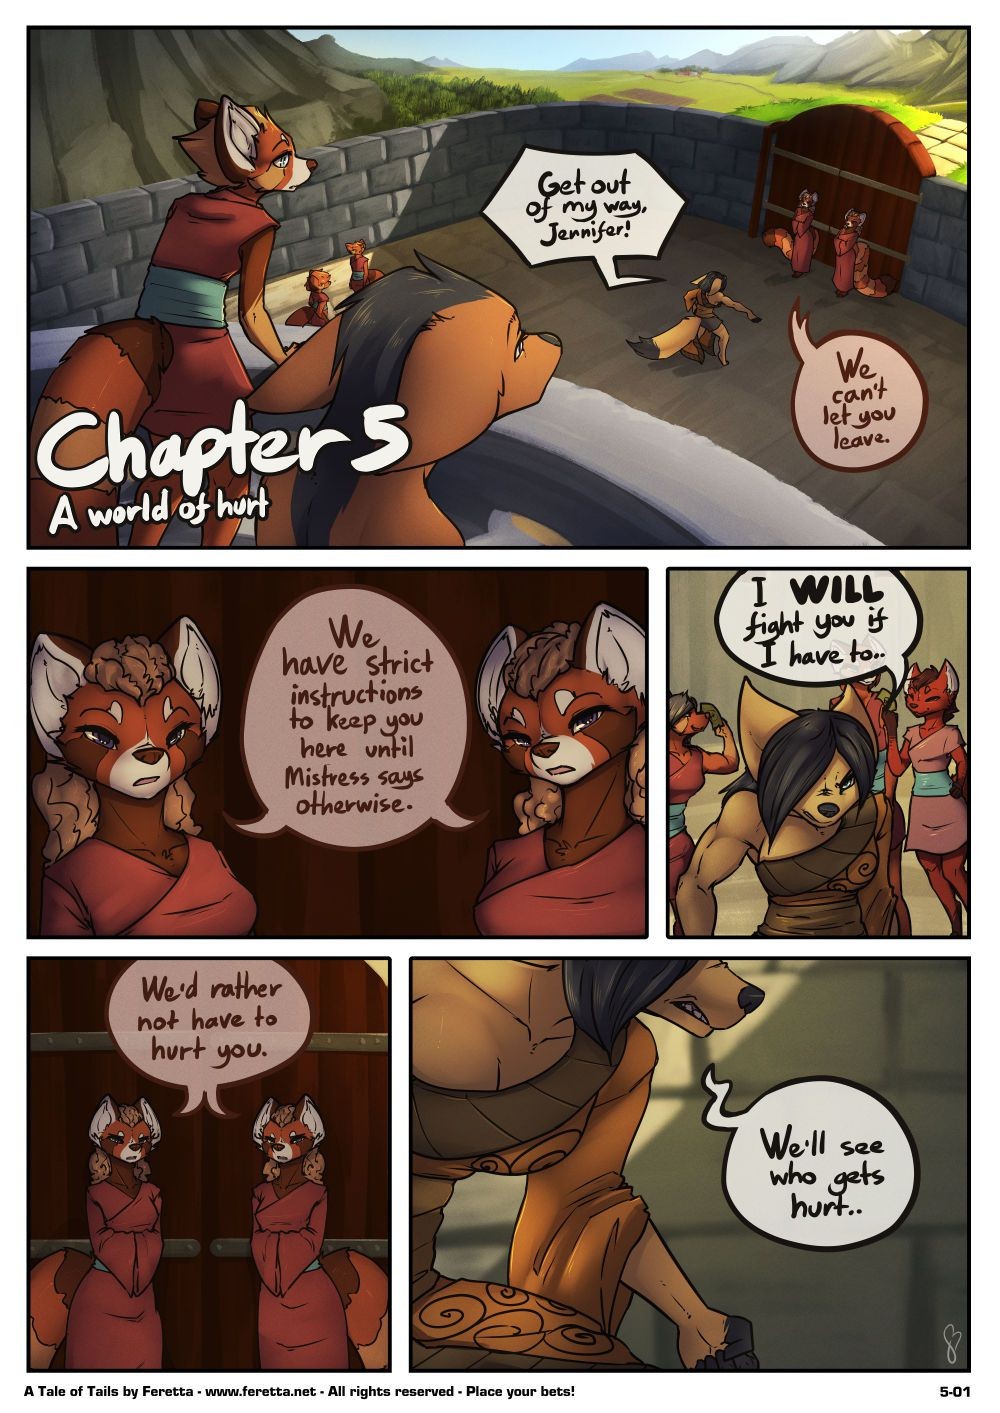 Old Man [Feretta] A Tale Of Tails: Chapter 5 - A World Of Hurt (ongoing) Punk